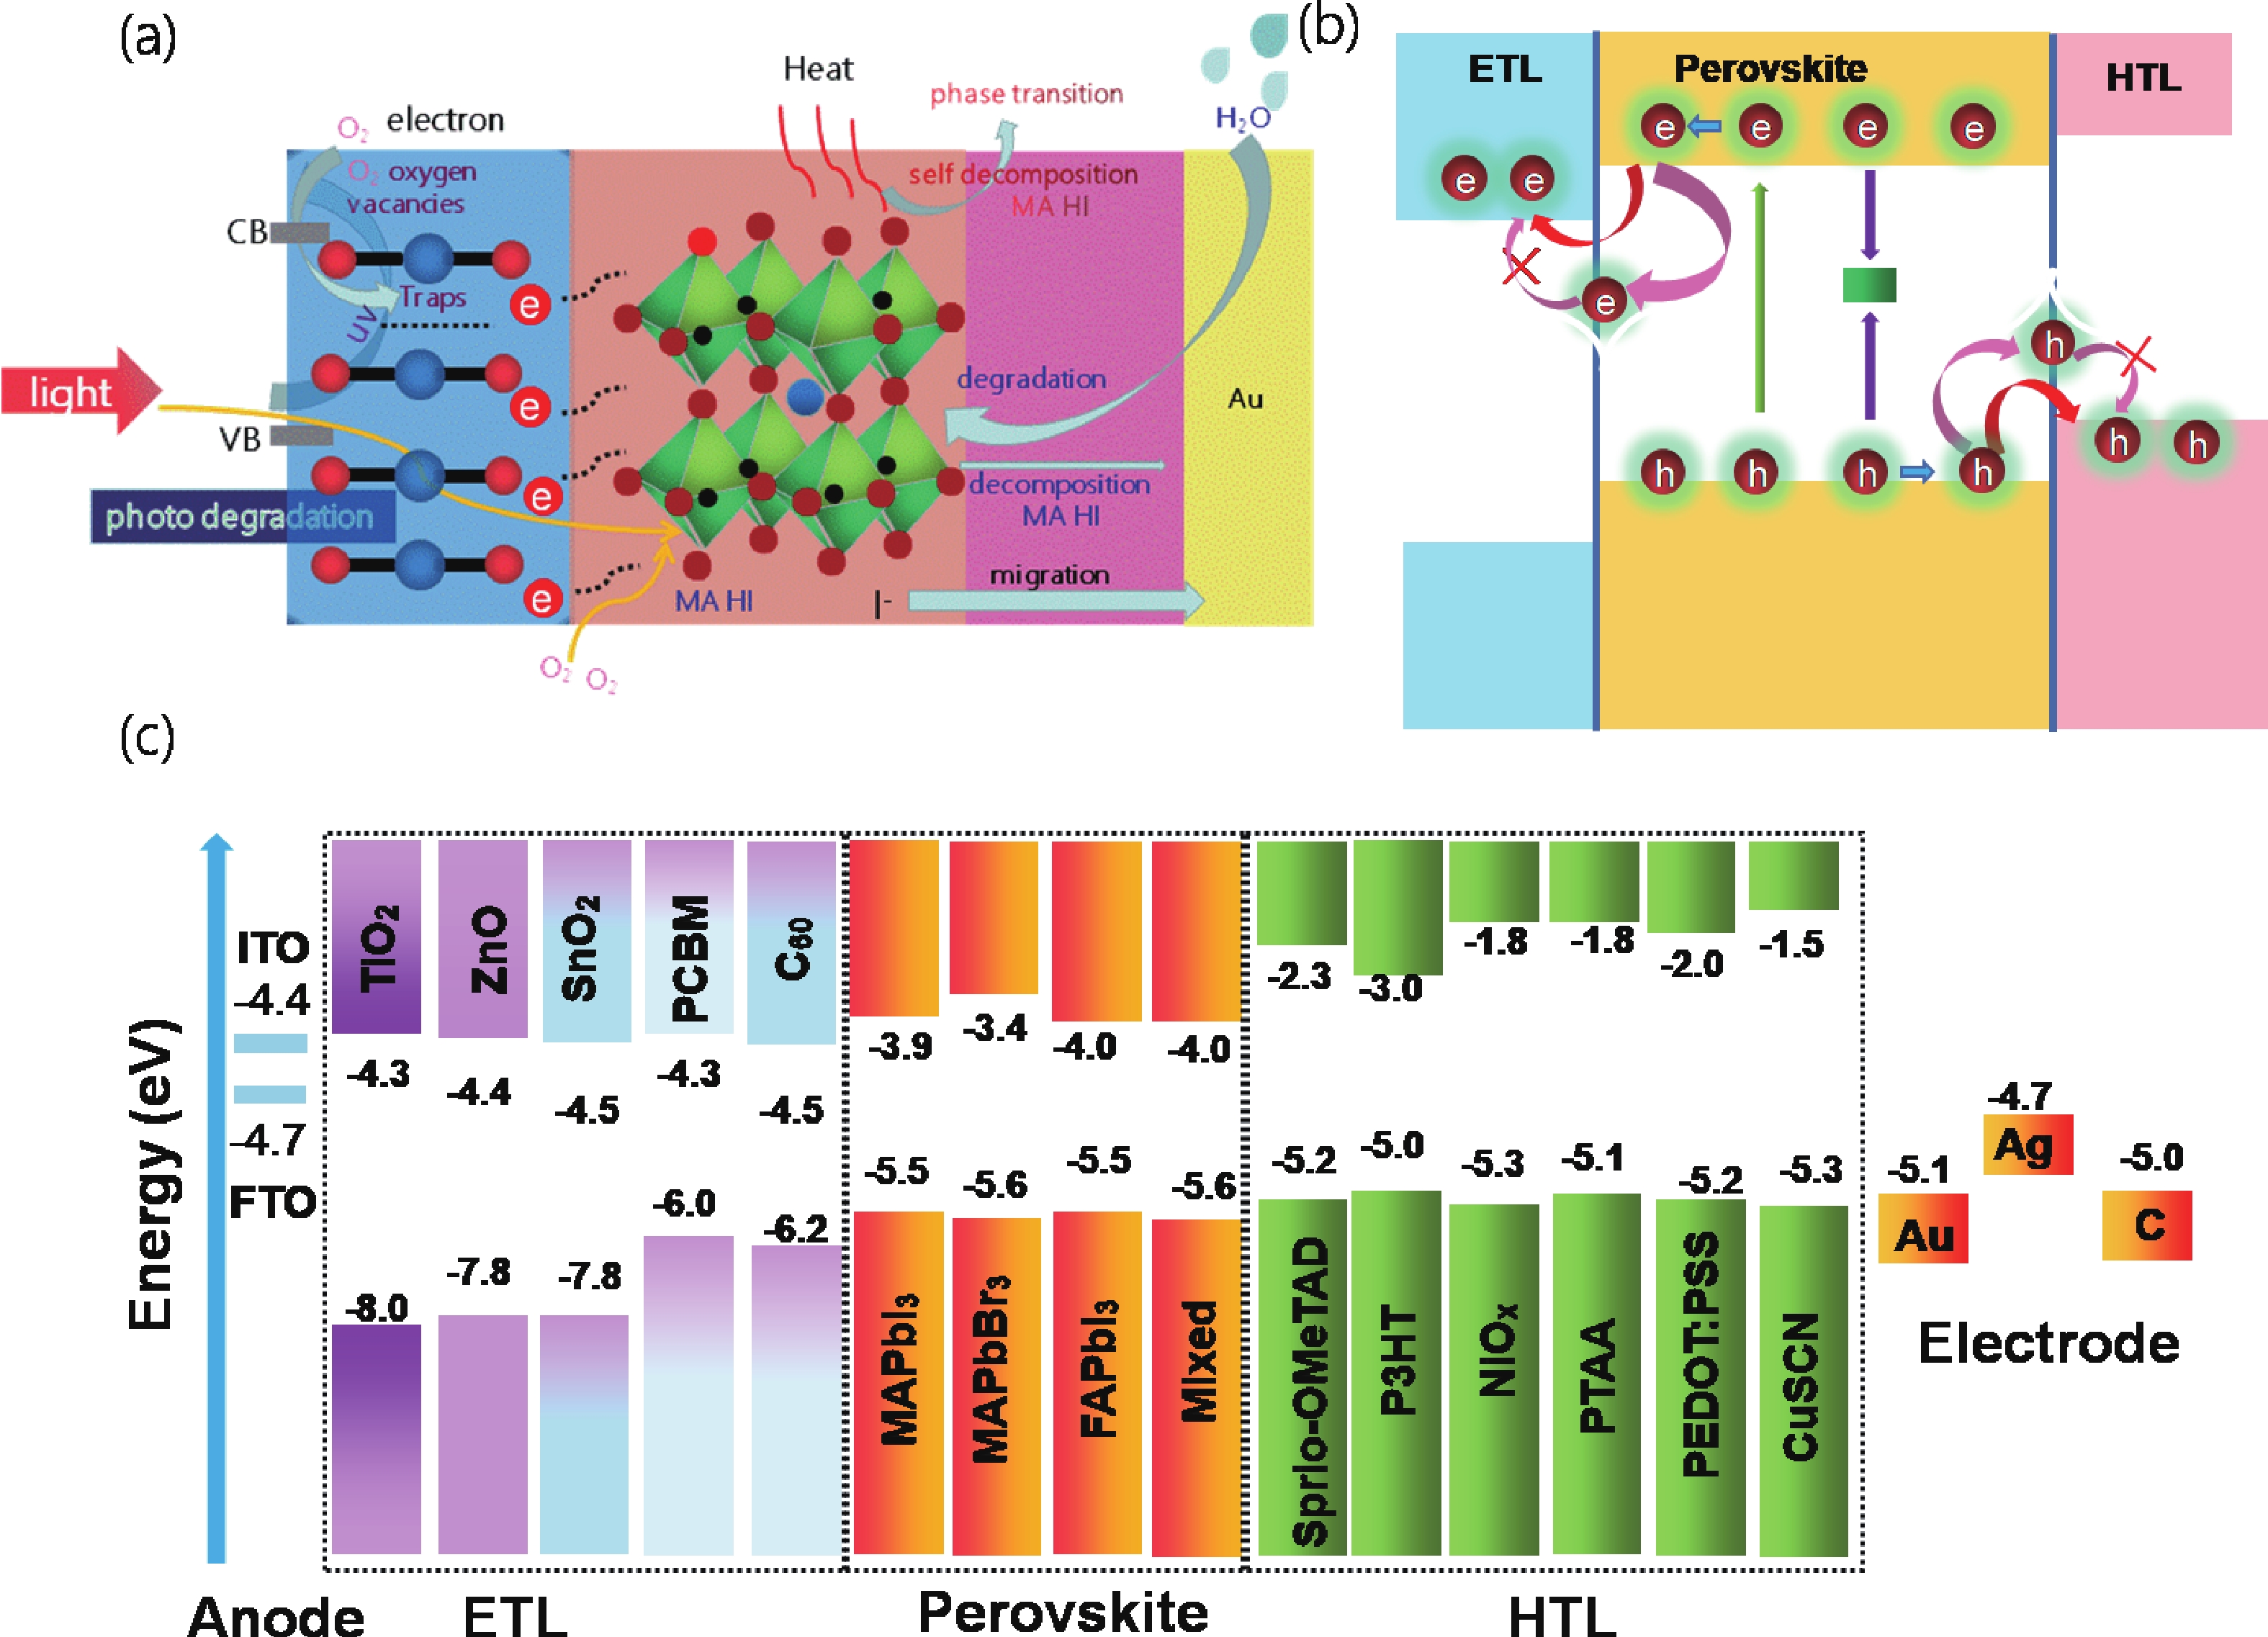 (Color online) (a) Perovskite crystal structure, Schottky defect, Frenkel defect and ion migration through interfaces. (b) Schematic illustration of photo-generation and, diffusion and transfer of charges at interfaces, trap-assisted nonradiative recombination (due to intrinsic defects and impurities at interfaces) and back transfer and interface recombination. (c) Energy band alignment of some typical materials used in perovskite solar cells.